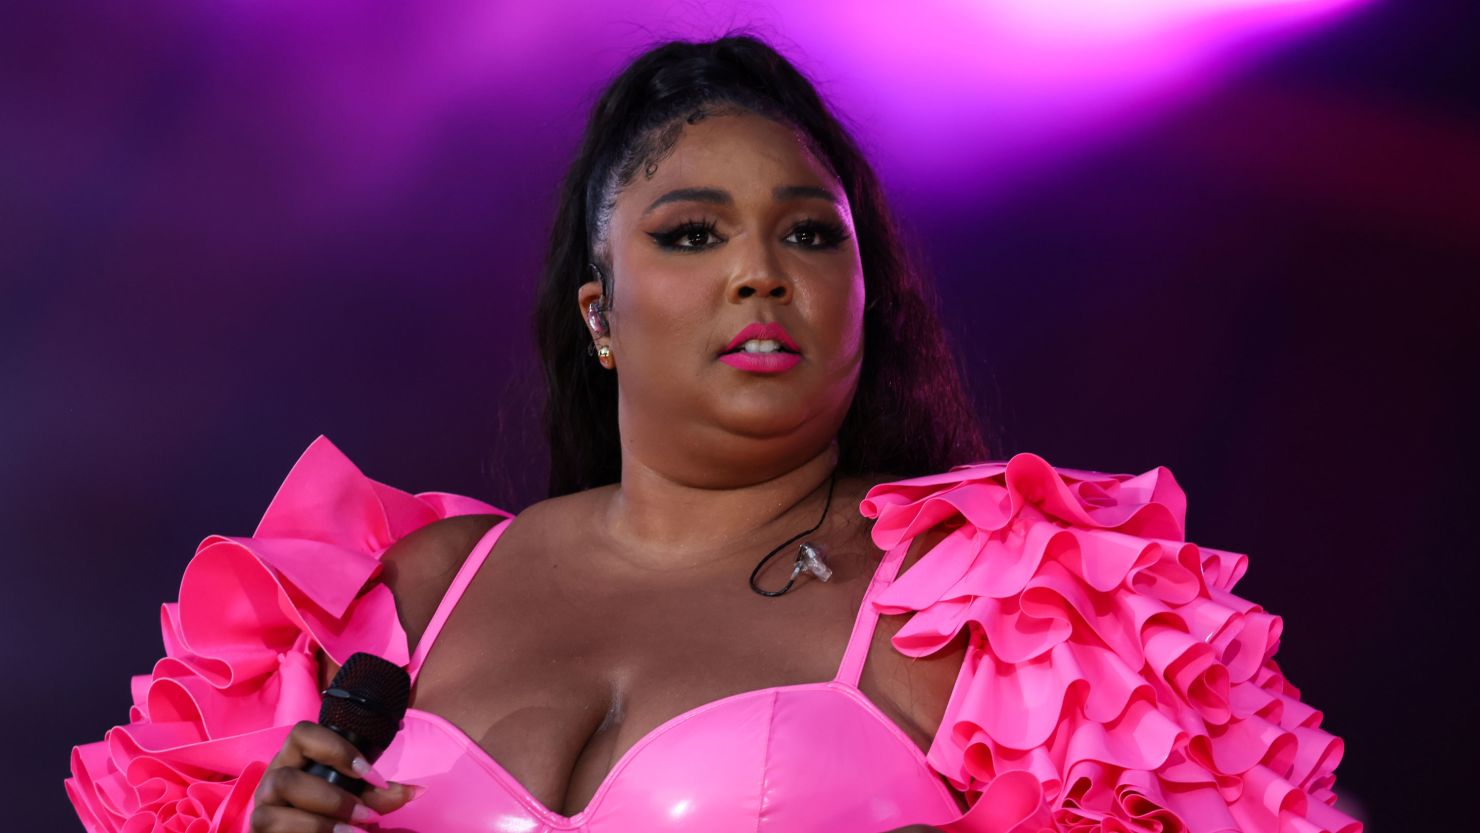 Person who tried to call out Lizzo for airplane attire shut down